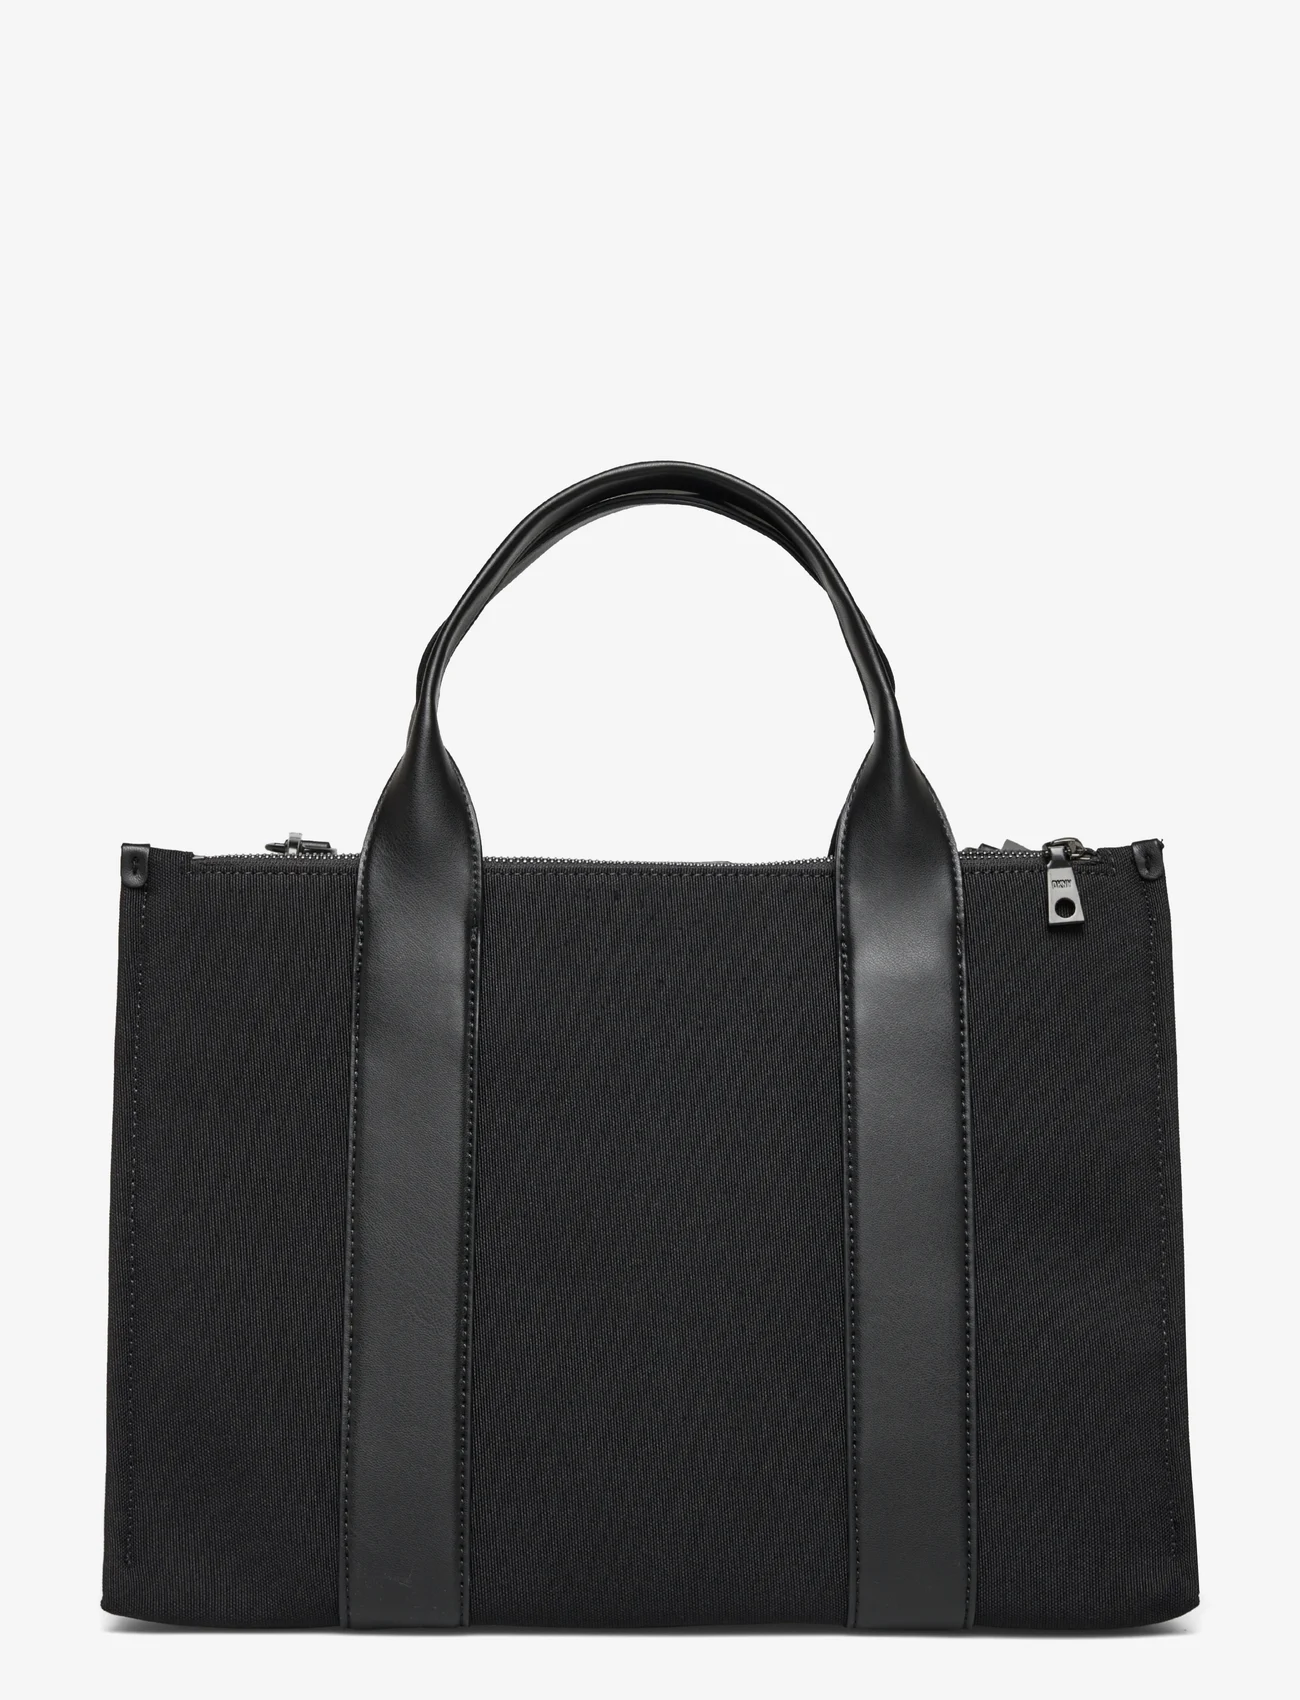 DKNY Bags - HOLLY MD TOTE - totes - bbl - blk/black - 1